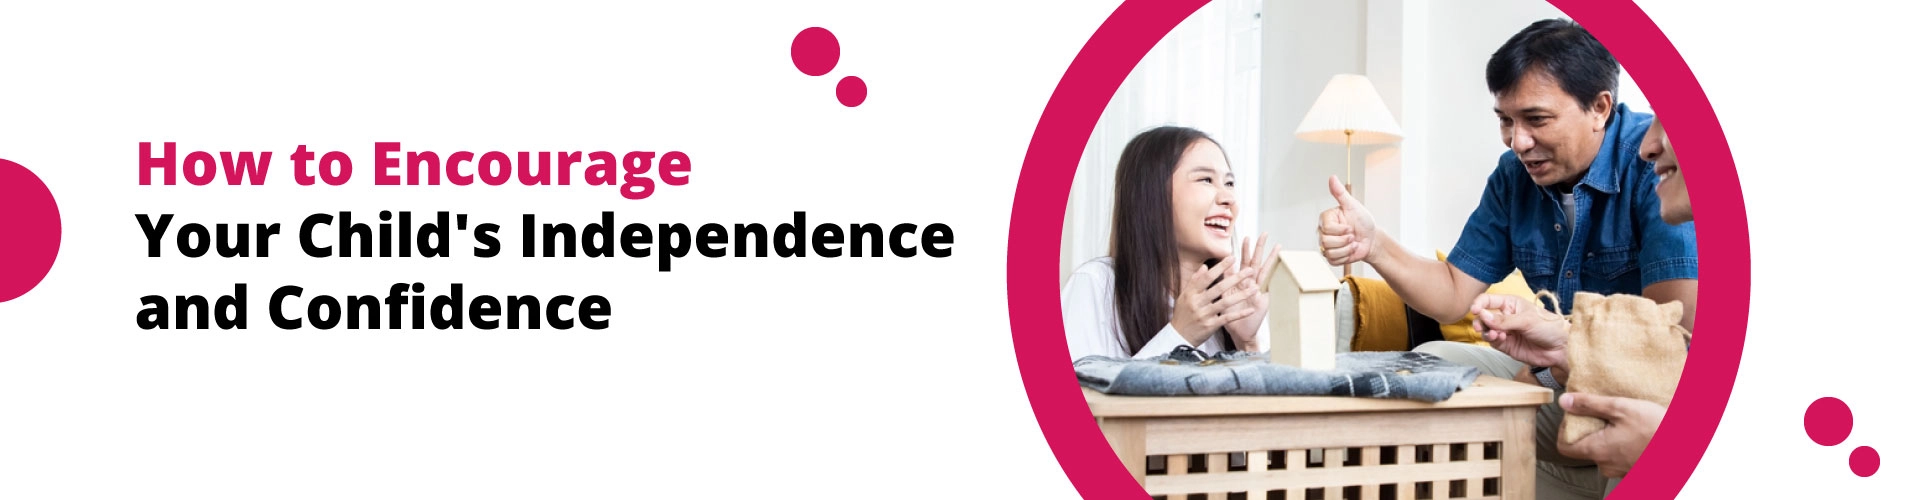 How to Encourage Your Child’s Independence and Confidence